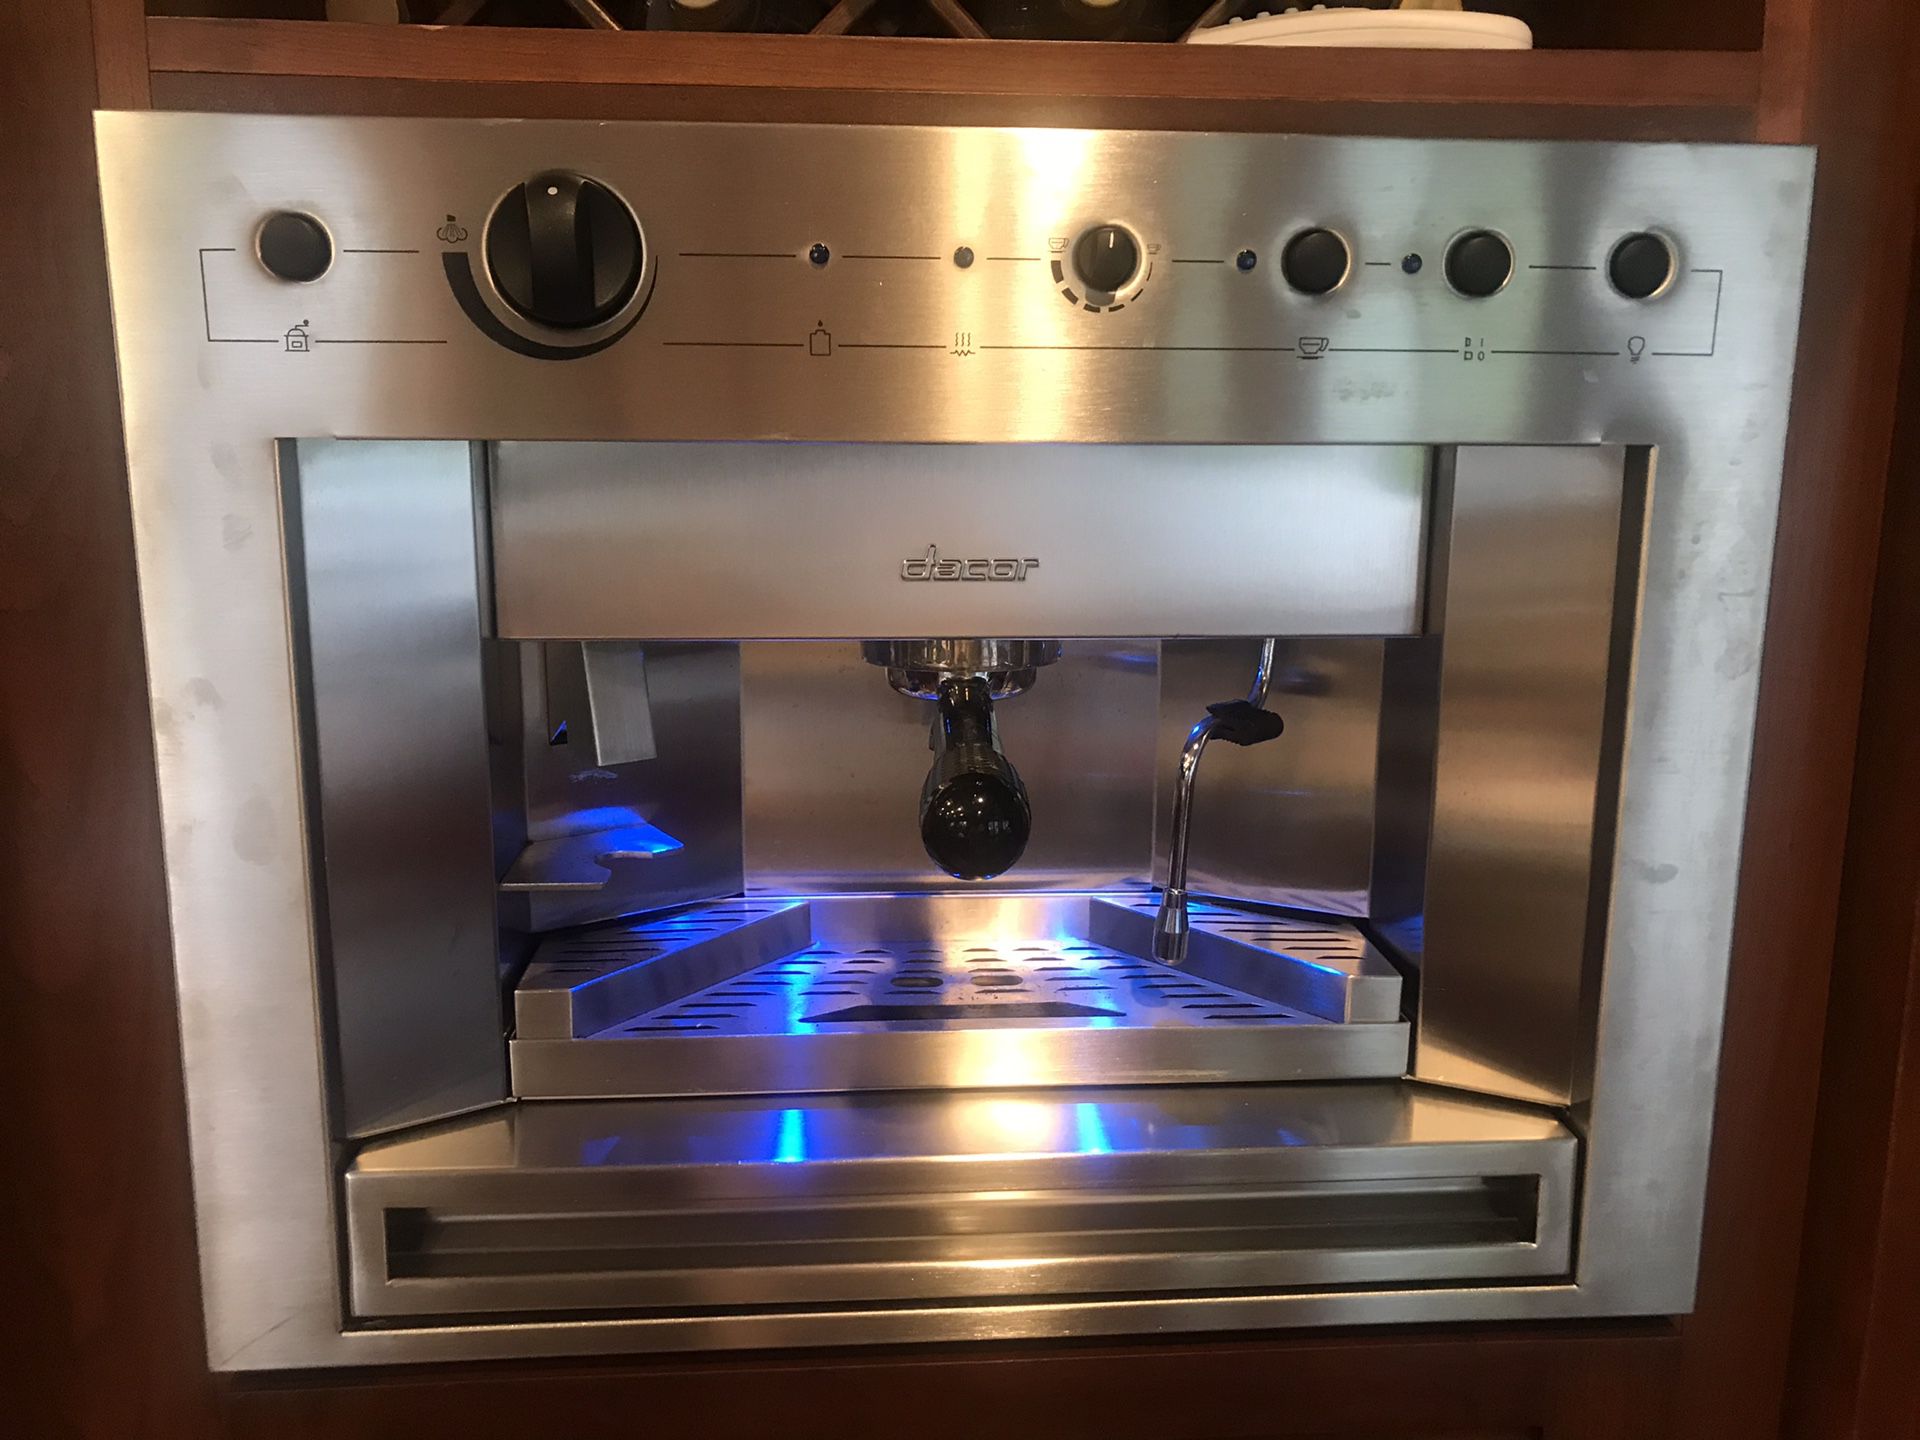 Dacor built in coffee maker!